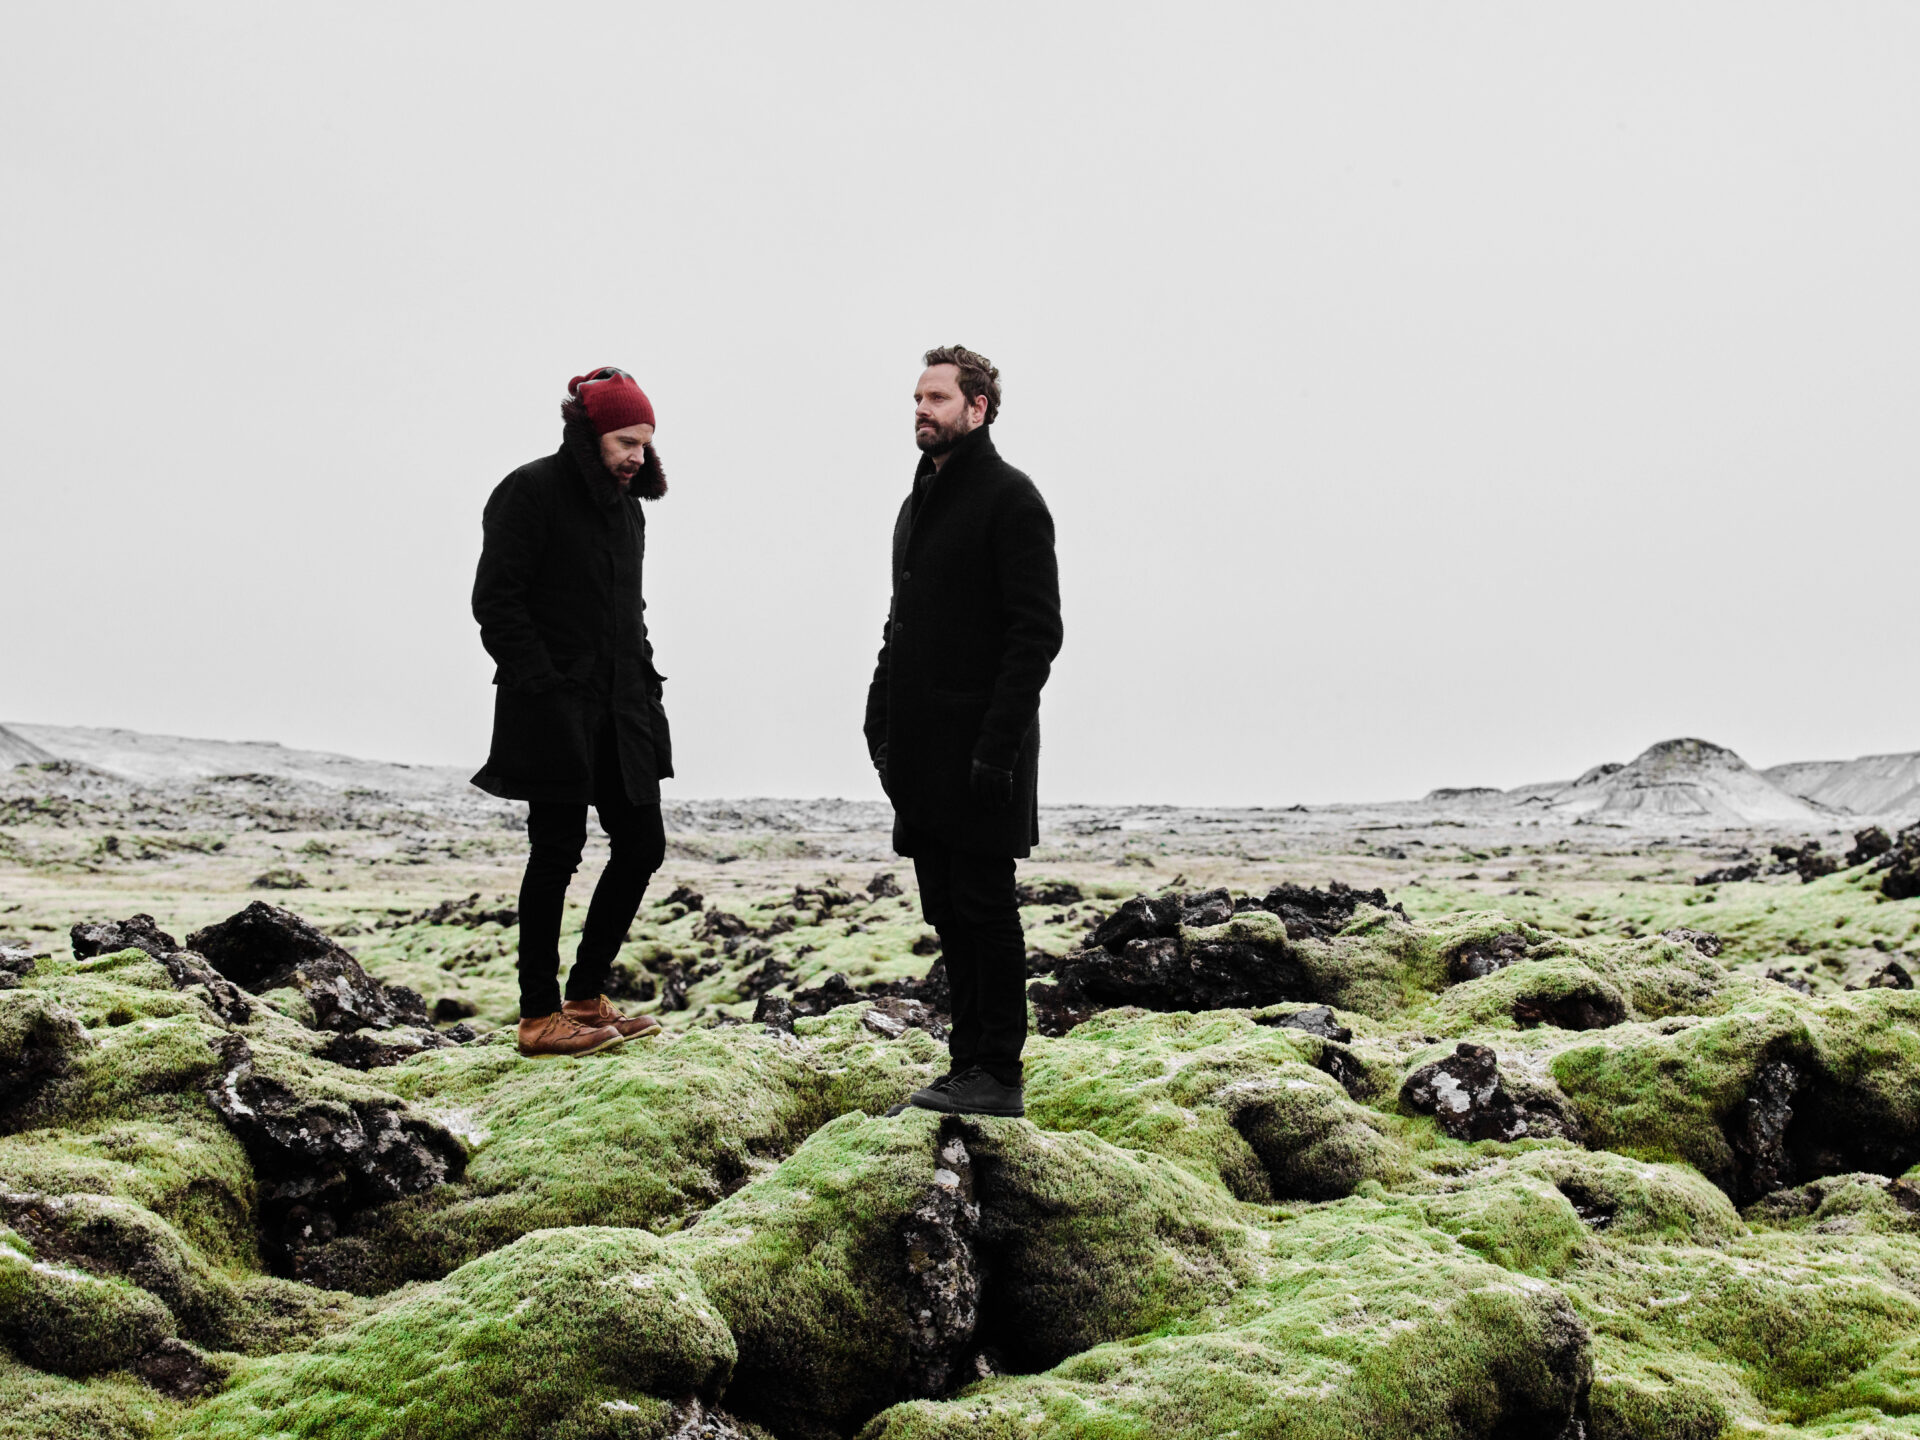 NEWS: A Winged Victory for the Sullen share new single 'All Our Friends are Vampires' ahead of live UK dates 3